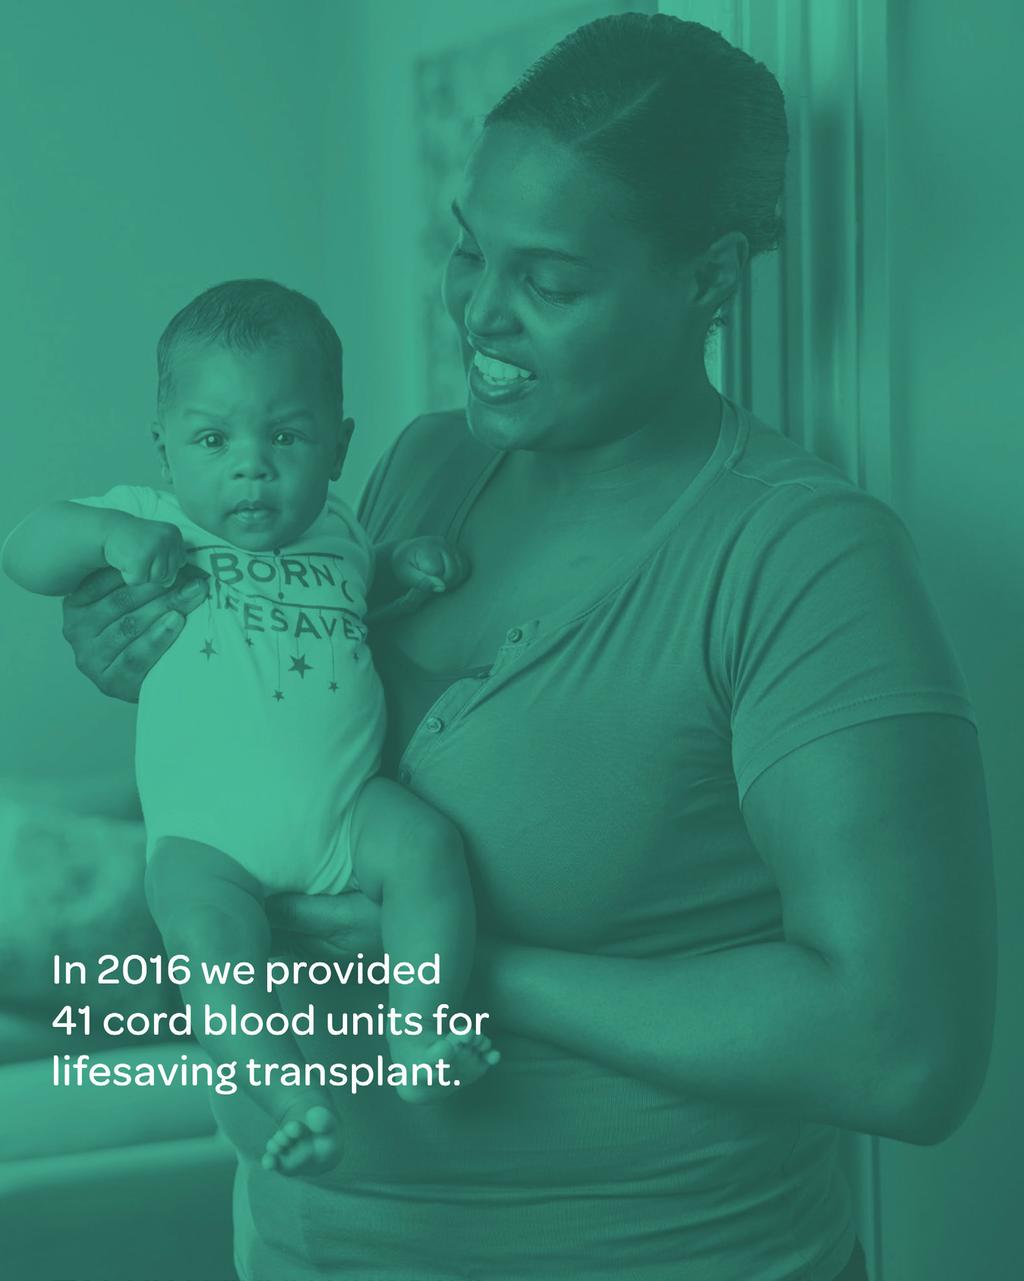 OUR CORD SUCCESS This year, NHS Blood and Transplant and Anthony Nolan have continued to achieve success in our cord blood banking programmes.